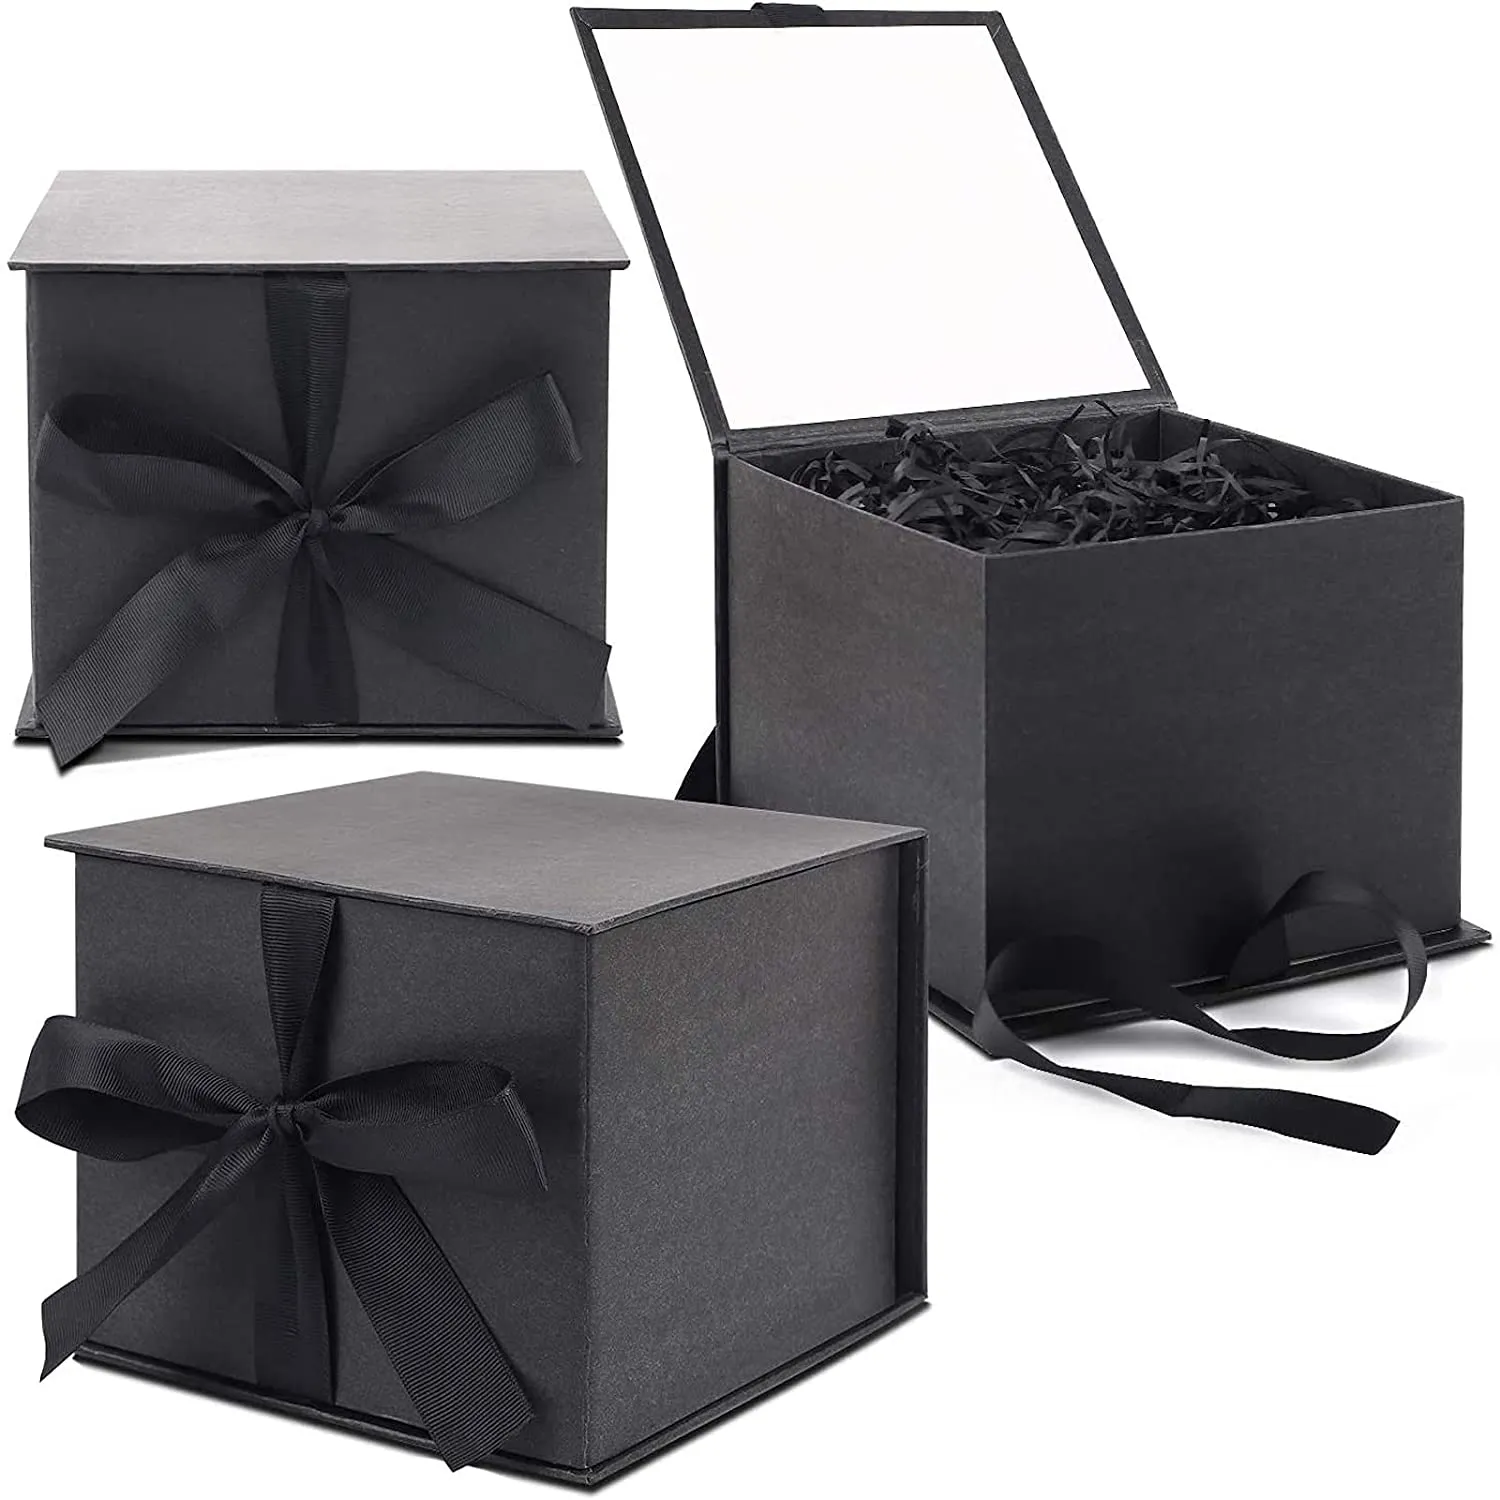 Customizable size Black Gift Boxes with Lid for Father's Day, Bridesmaid Gifts, Wedding, Birthday, Graduation Presents box